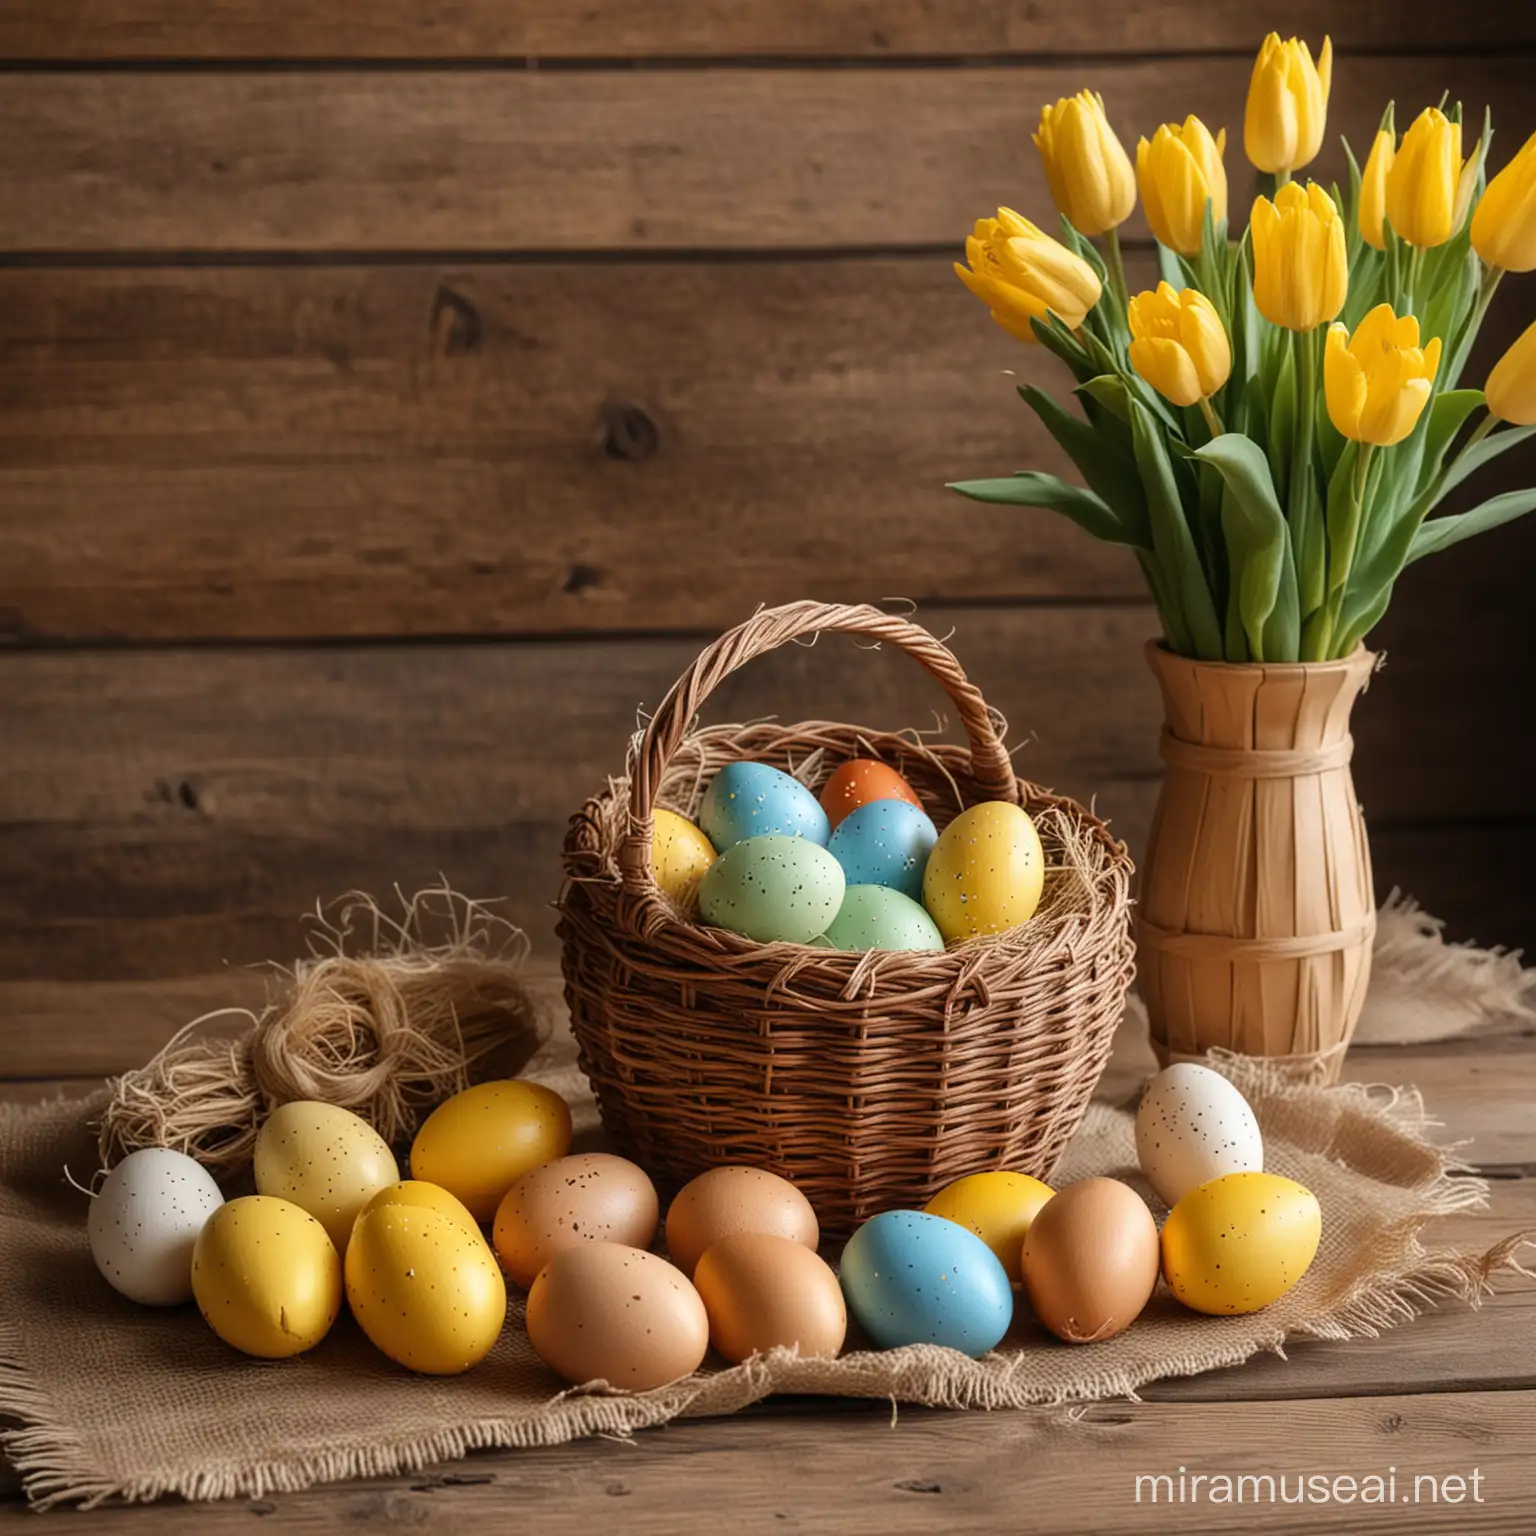 Rustic Easter Table with Wooden Eggs and Spring Flowers